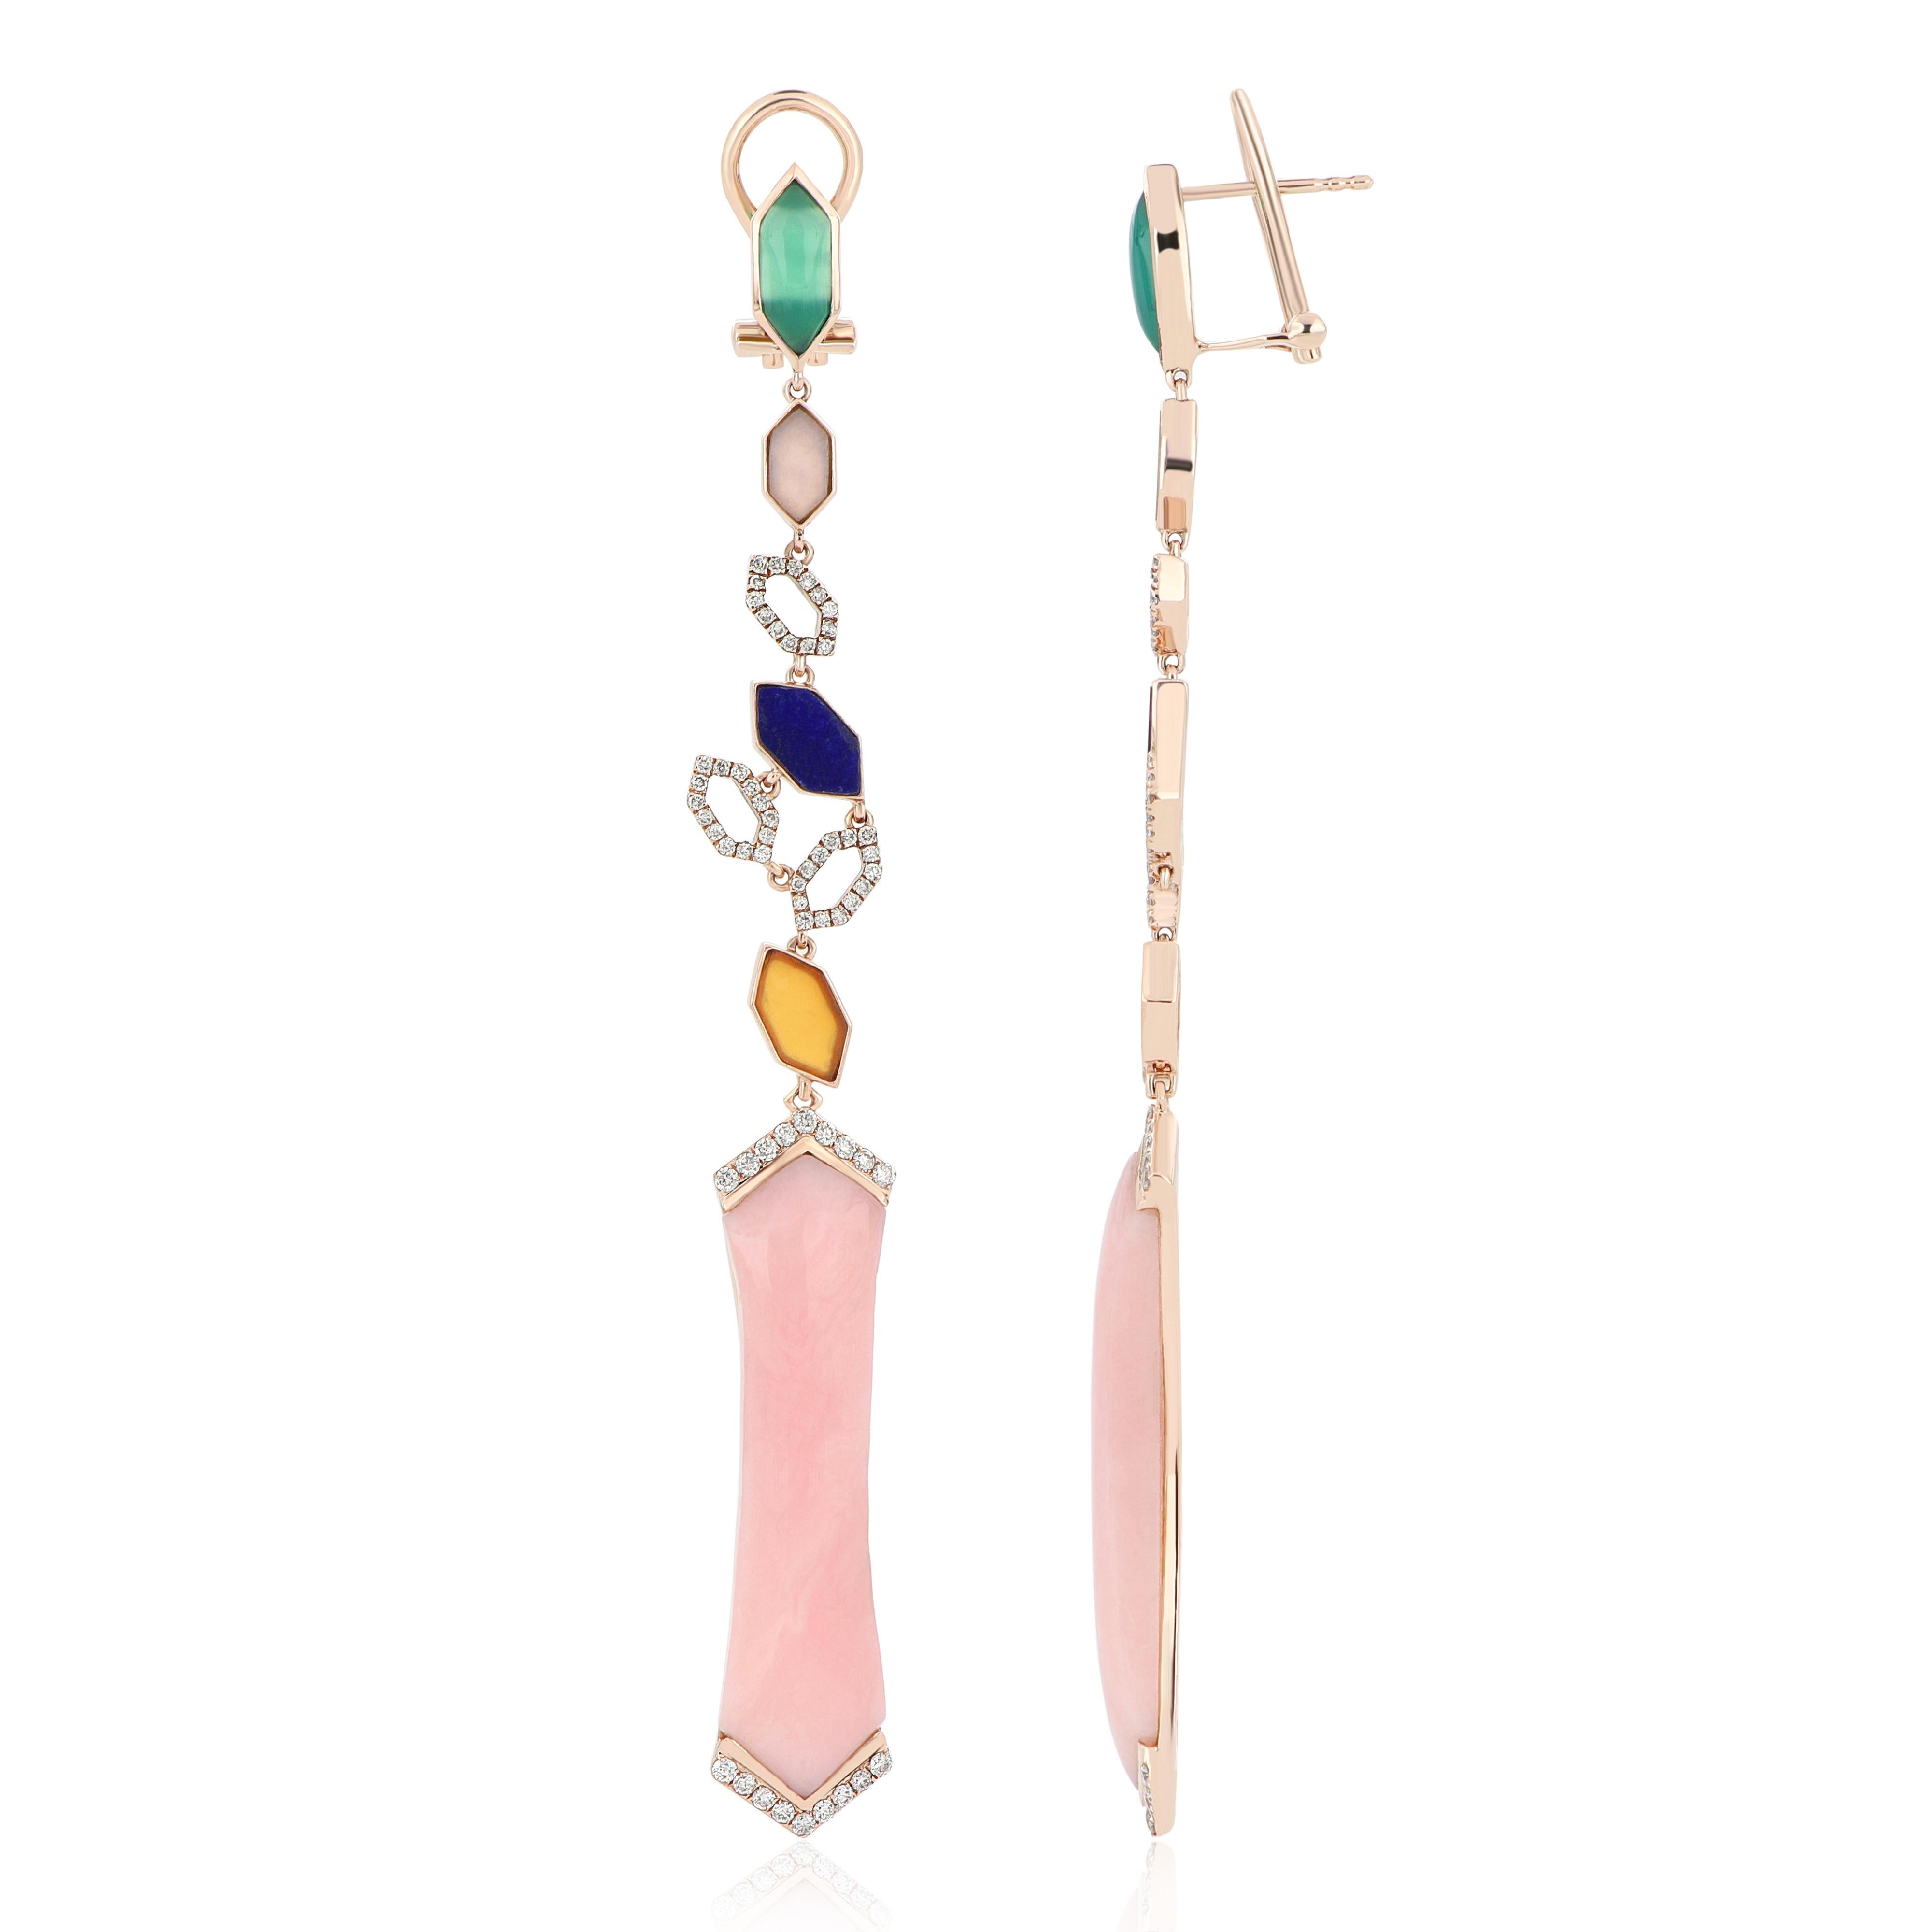 Elegant and exquisitely detailed 14 Karat Rose Gold Earrings, center set with 17.65 Cts Cab Hexagon Shape Pink Opal, accented with Green Onyx, Carnelian, Lapis and micro pave set Diamonds, weighing approx. 0.66 Cts.  Beautifully Hand crafted in 14